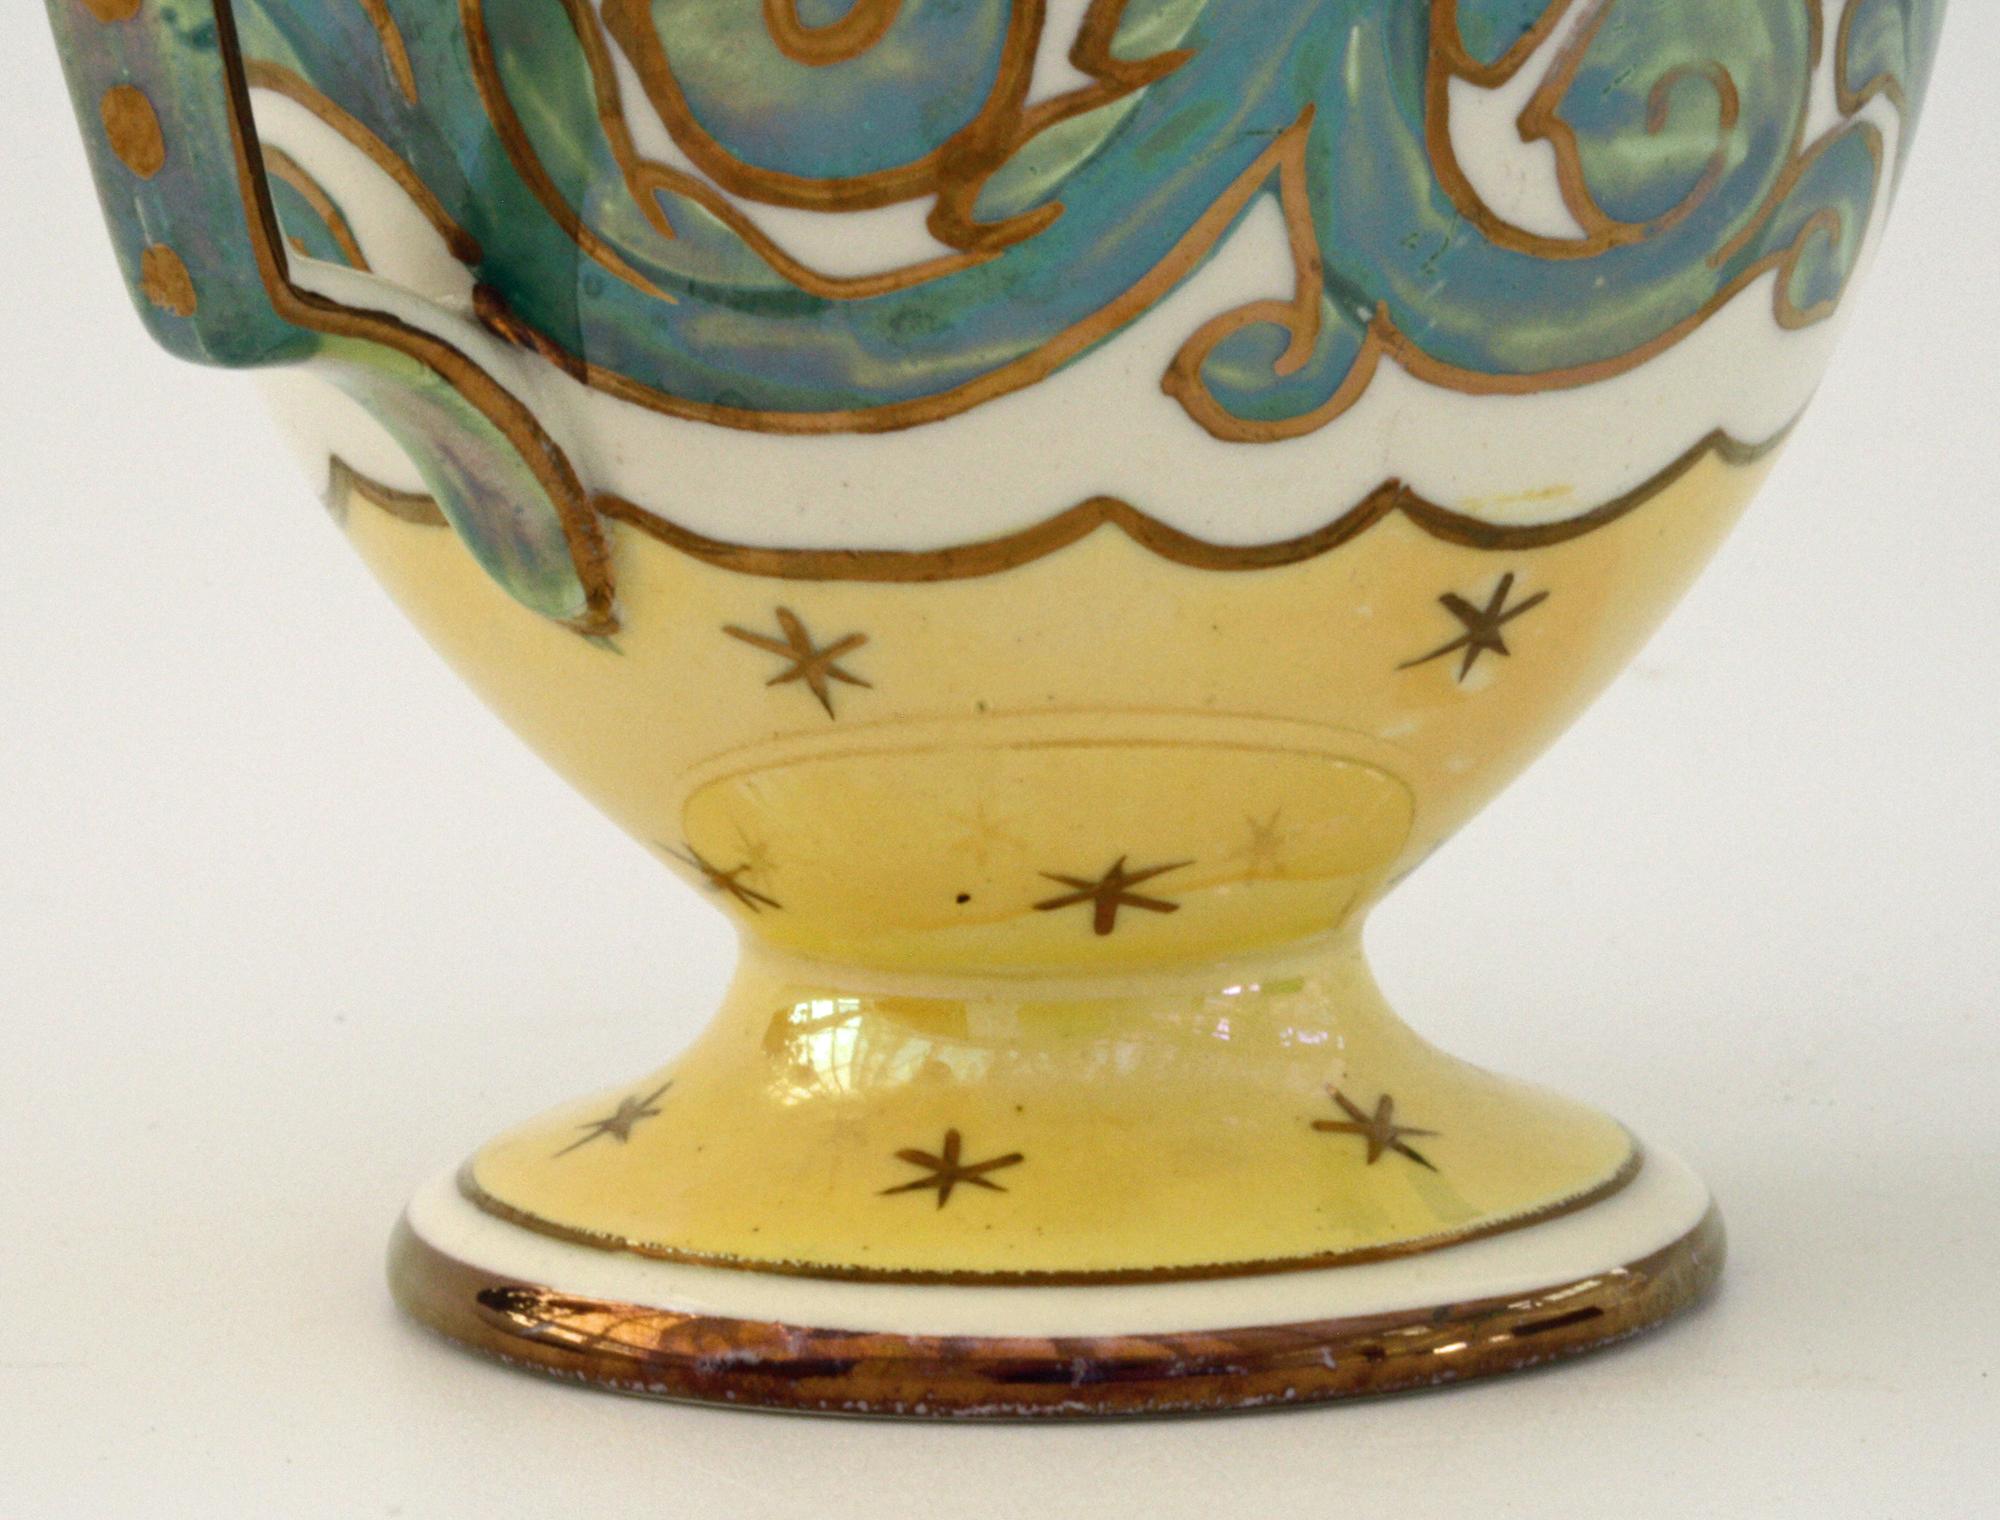 A stylish and unusual Art Nouveau Wedgwood lustre glazed twin handled pedestal cup believed to date from circa 1900. The cup stands raised on a rounded pedestal foot with loop handles applied to either side of the rounded cup shaped body. The cup is